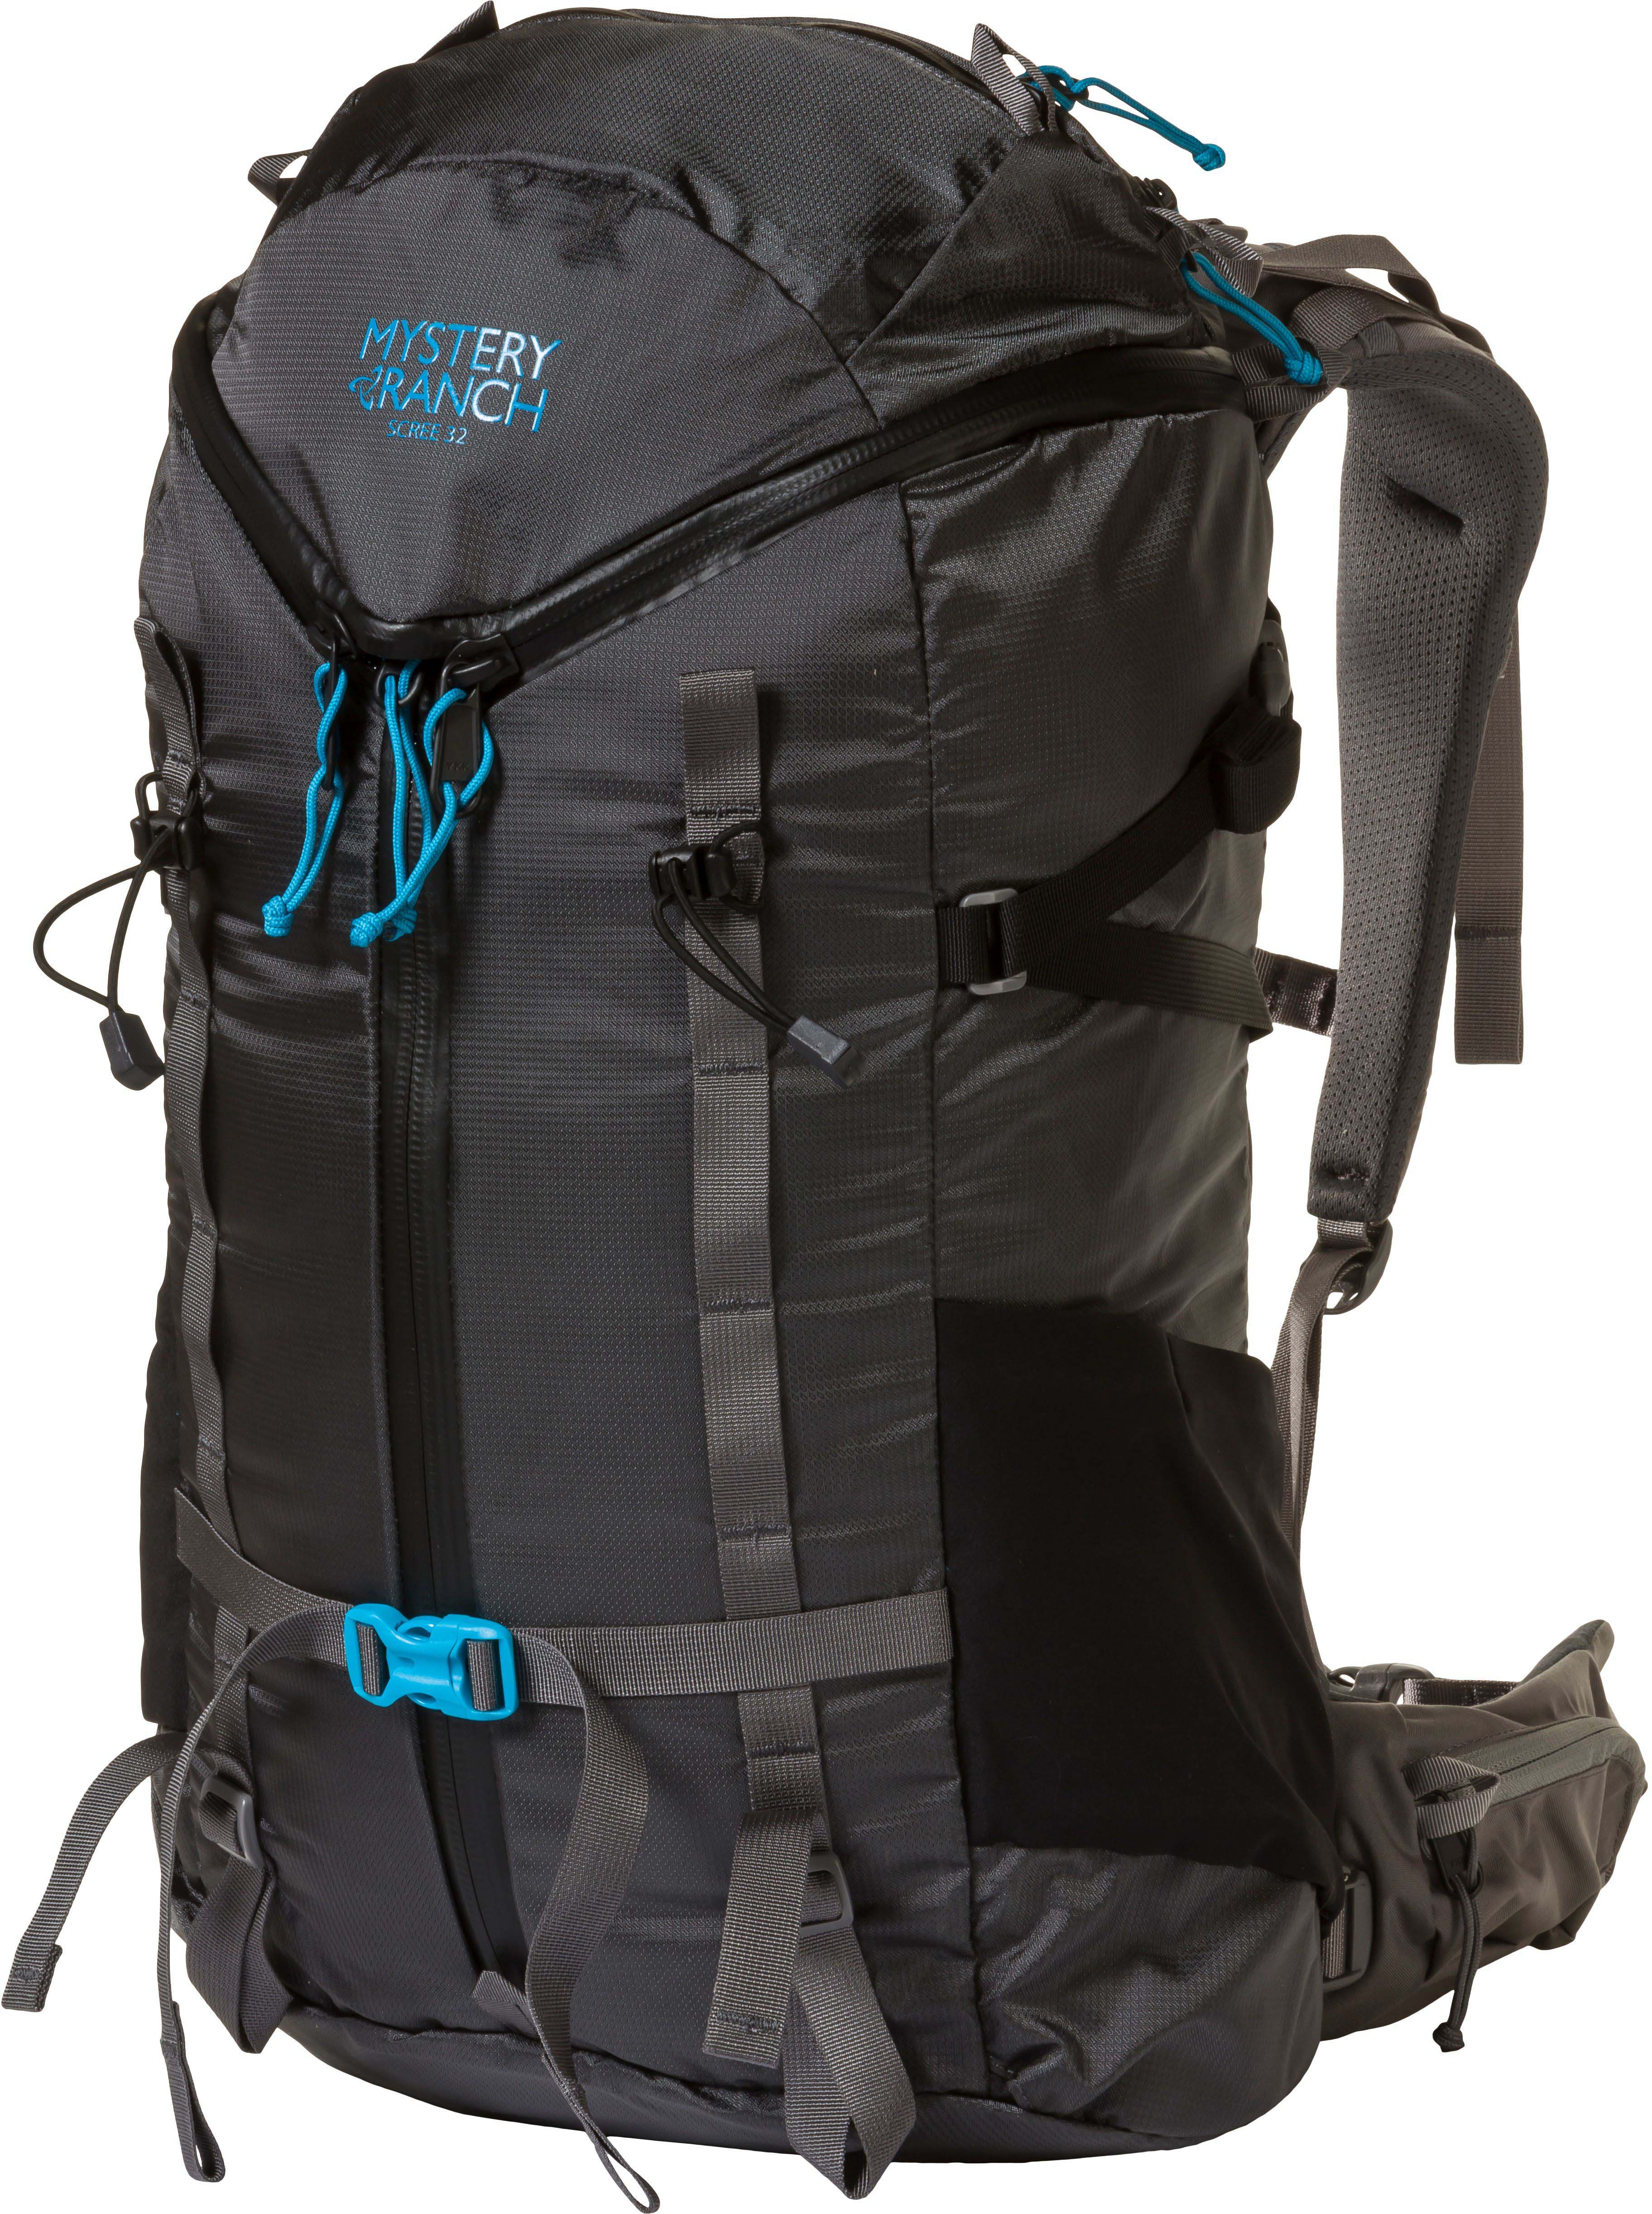 Mystery Ranch Scree 32 Backpack Women S With Free S H Campsaver